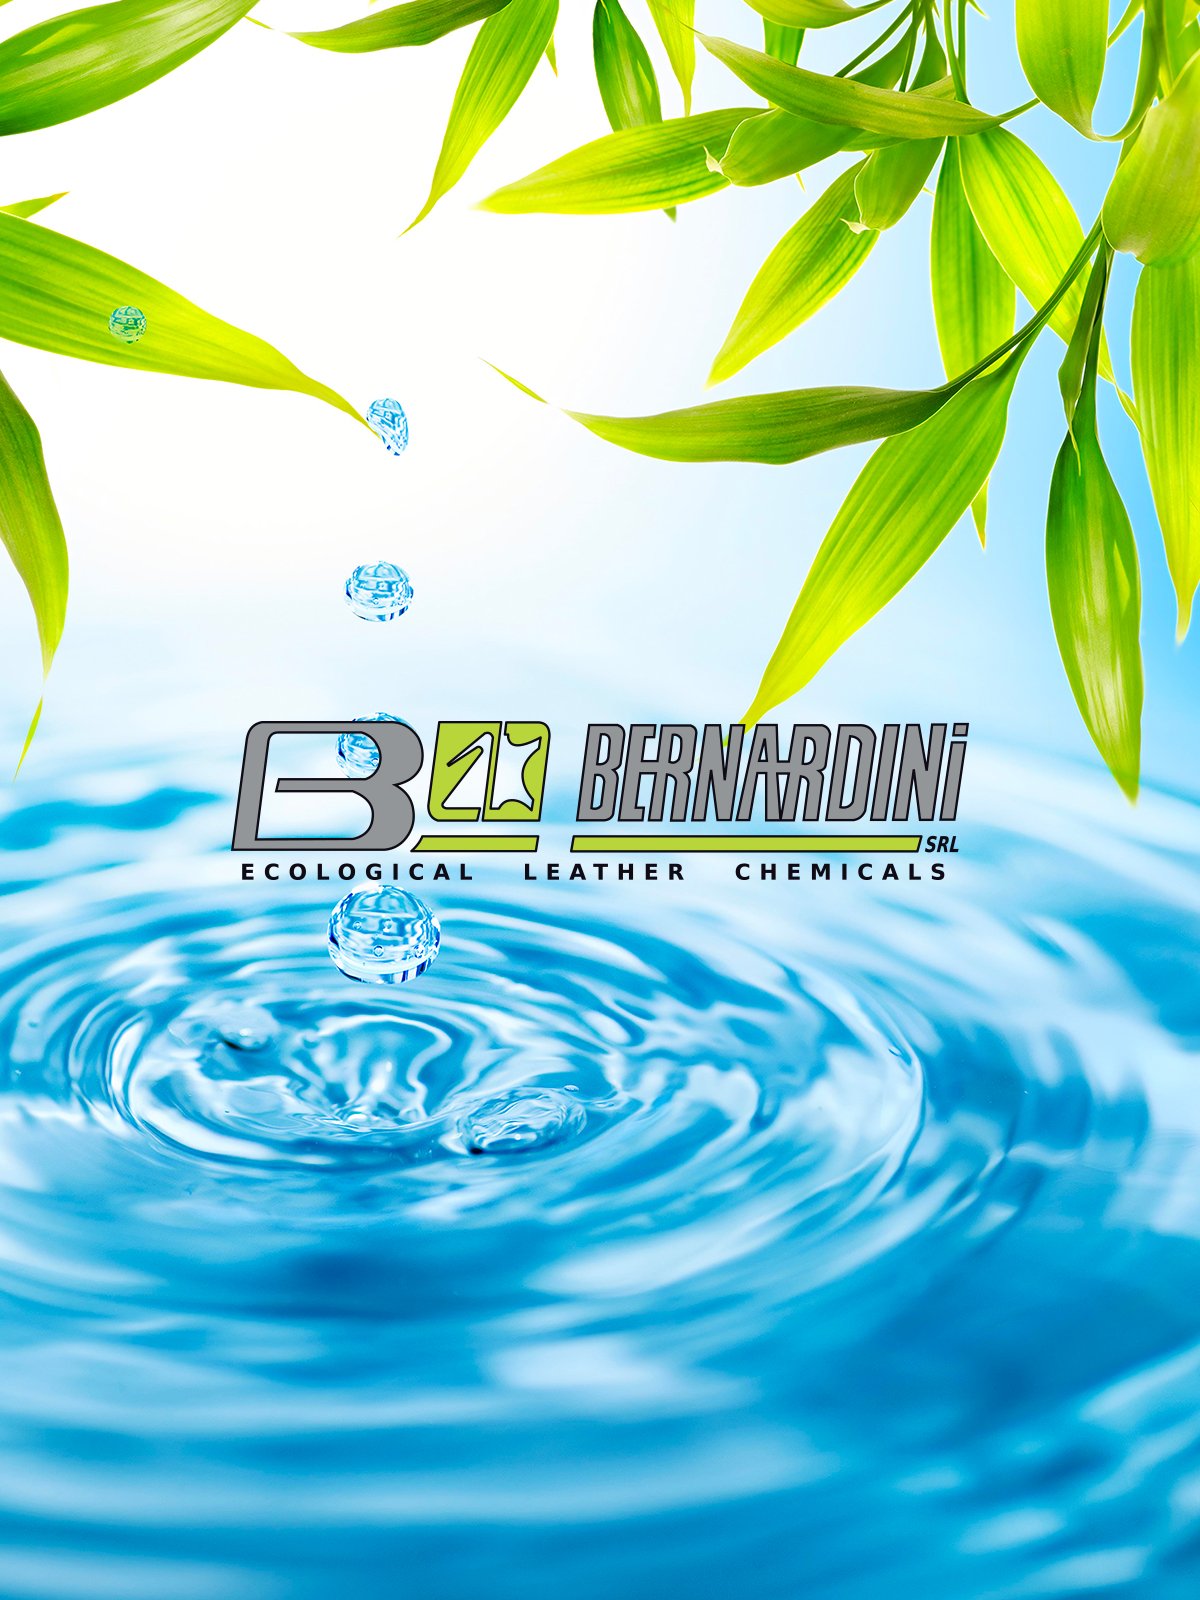 Bernardini Srl's journey toward ecological transition continues with ICEC ZDHC level 3 certification